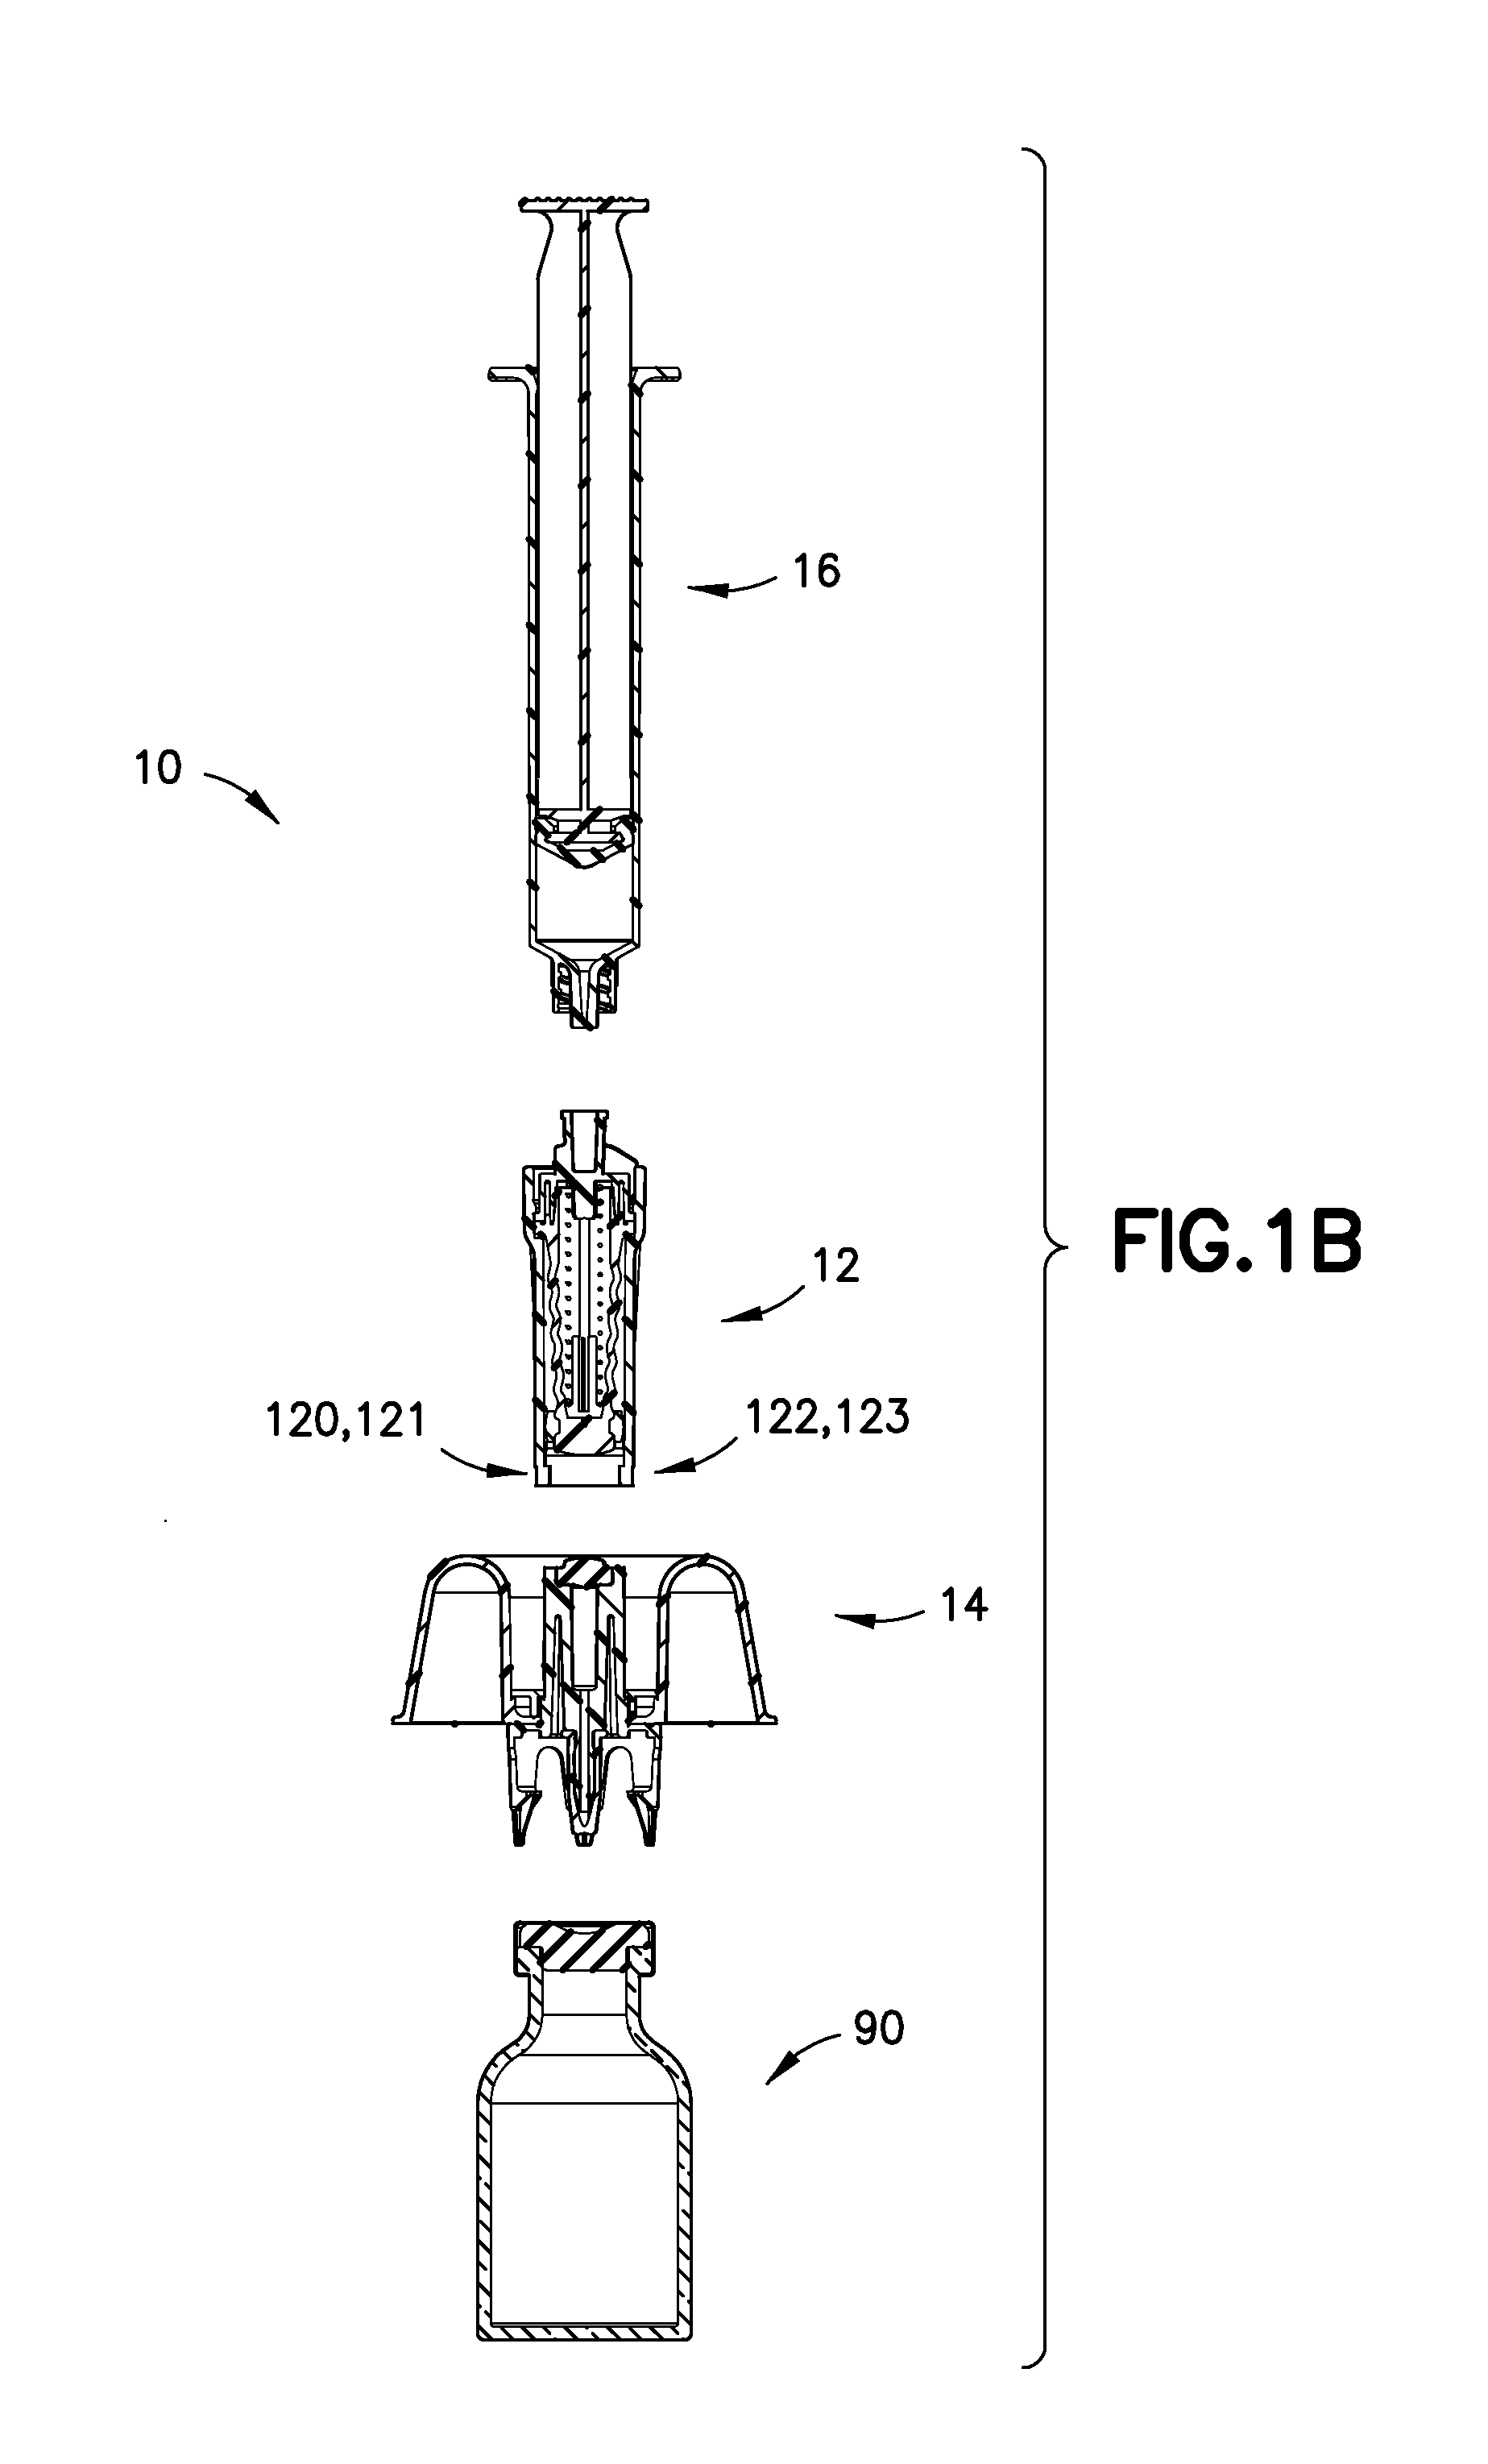 System for Closed Transfer of Fluids